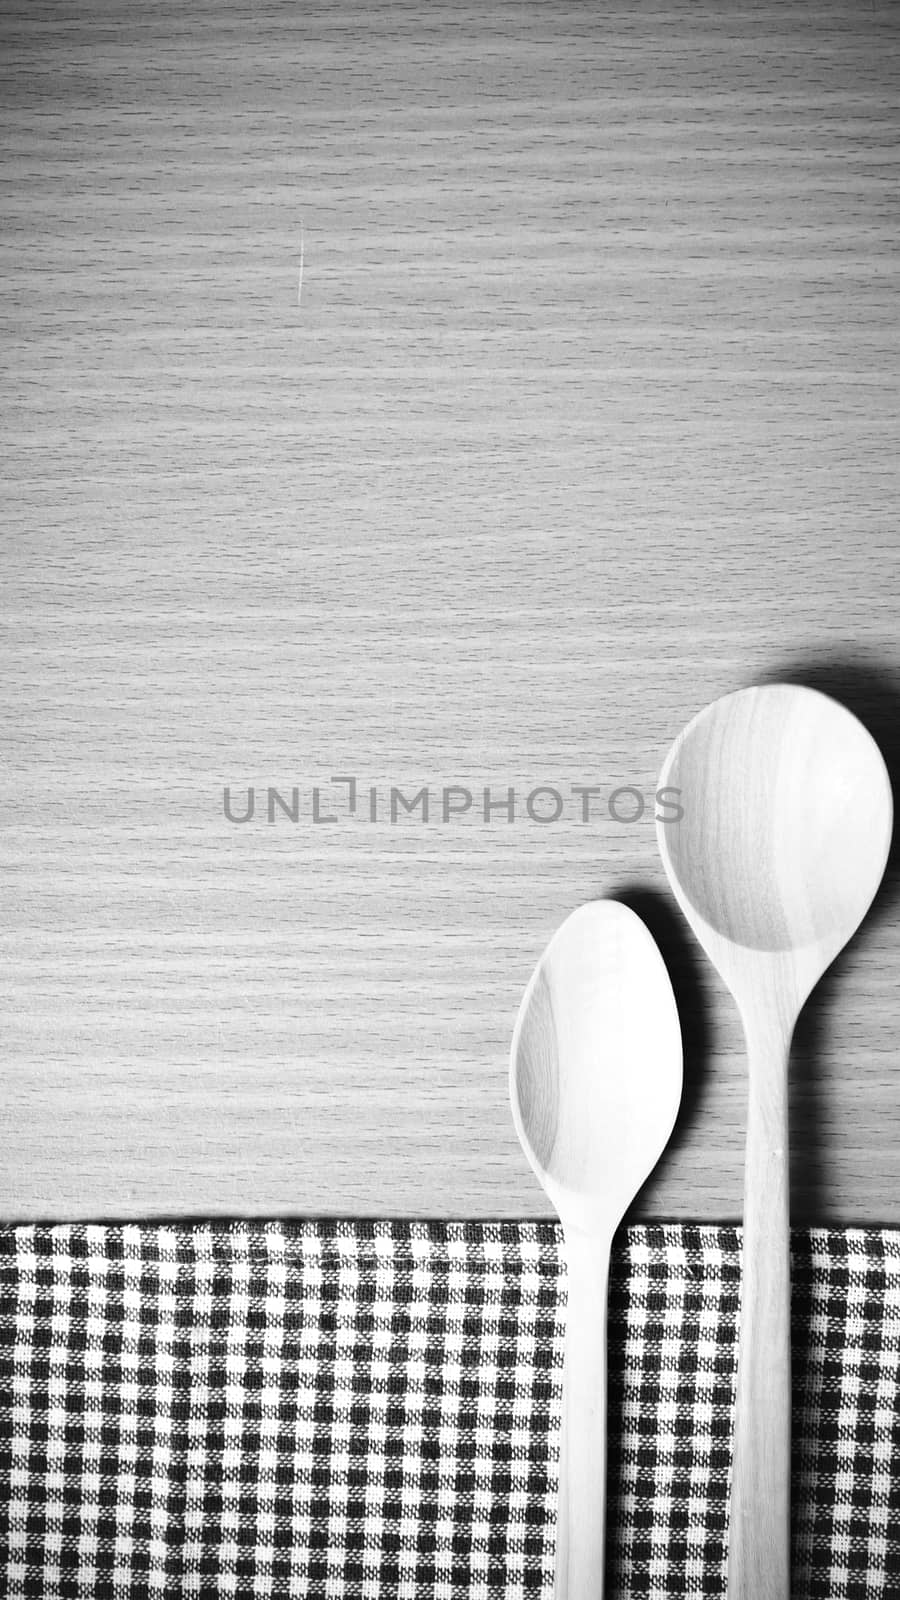 wood spoon and kitchen towel black and white color tone style by ammza12